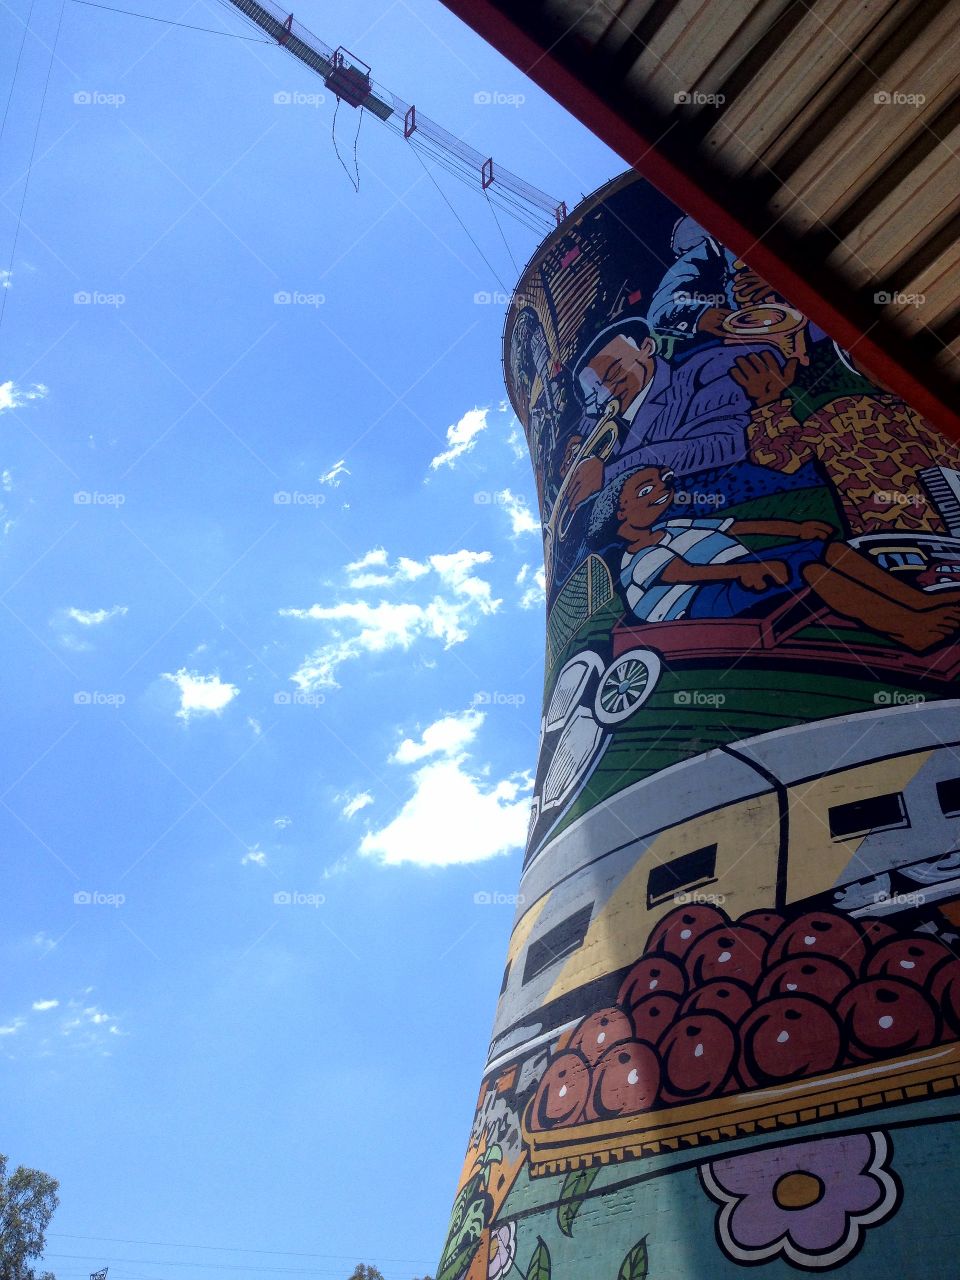 bungee! soweto towers